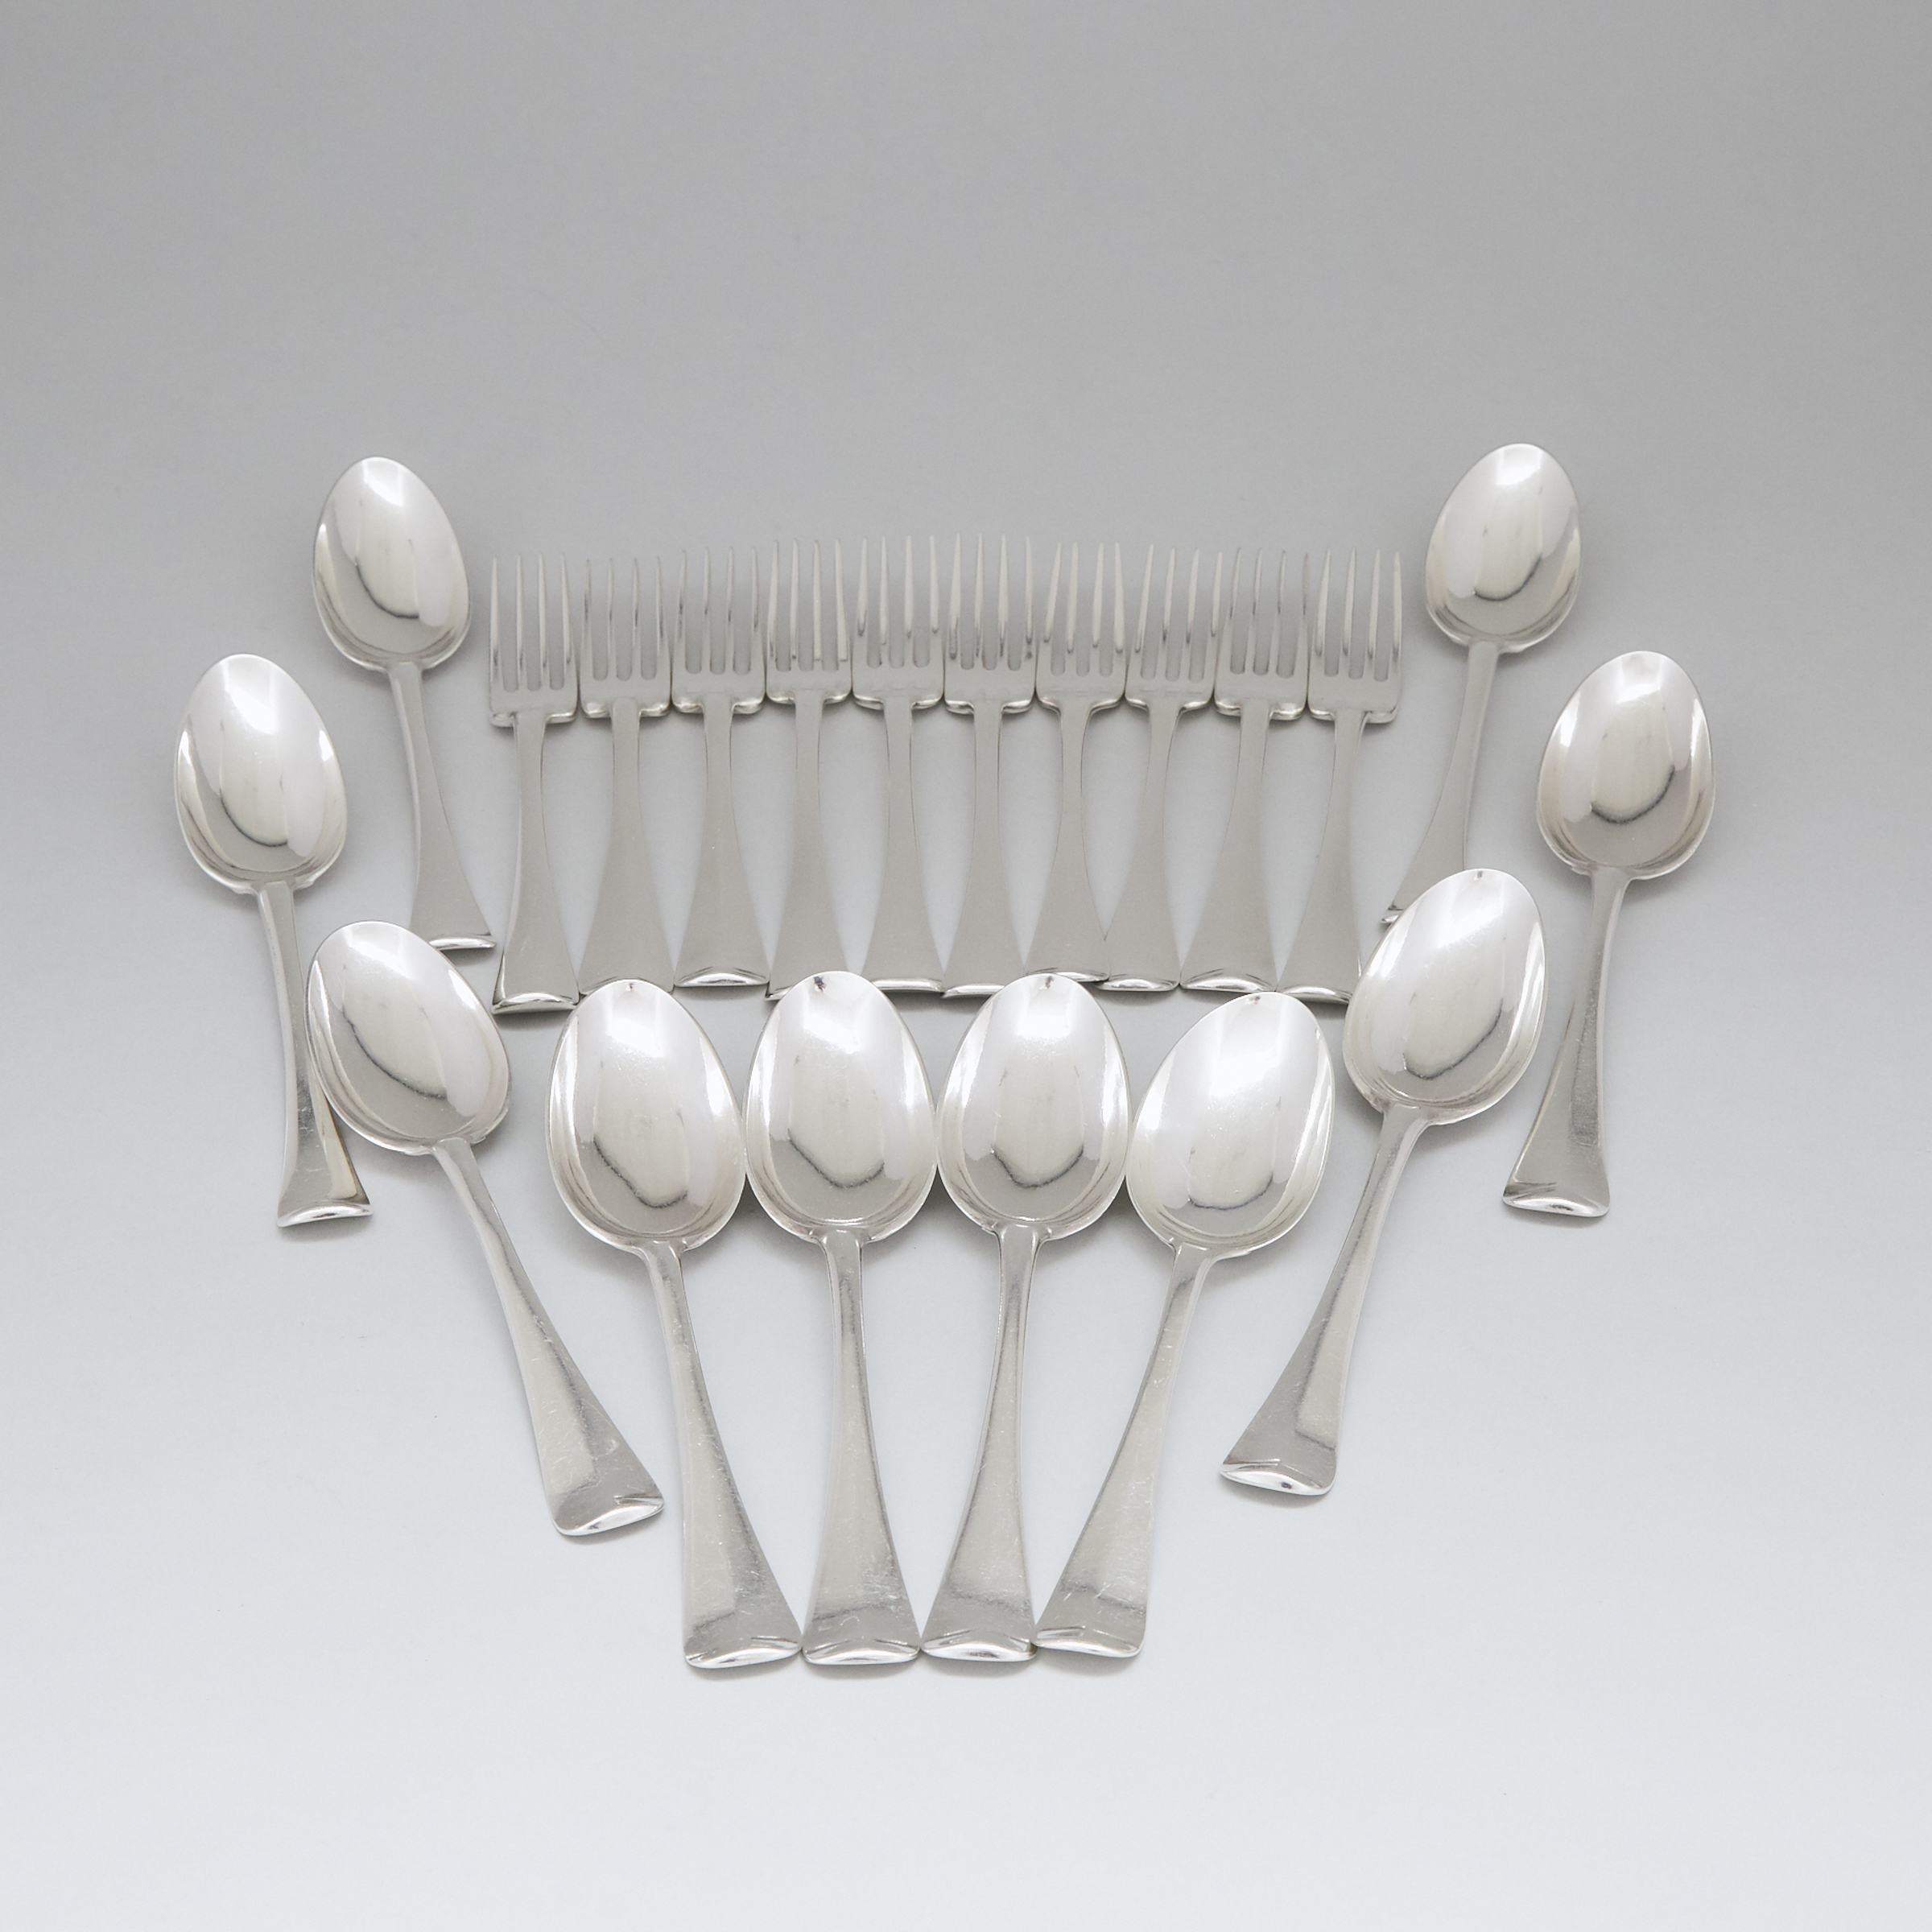 Ten Dutch Silver Hanoverian Pattern Table Spoons and Ten Forks, The Hague, 18th century